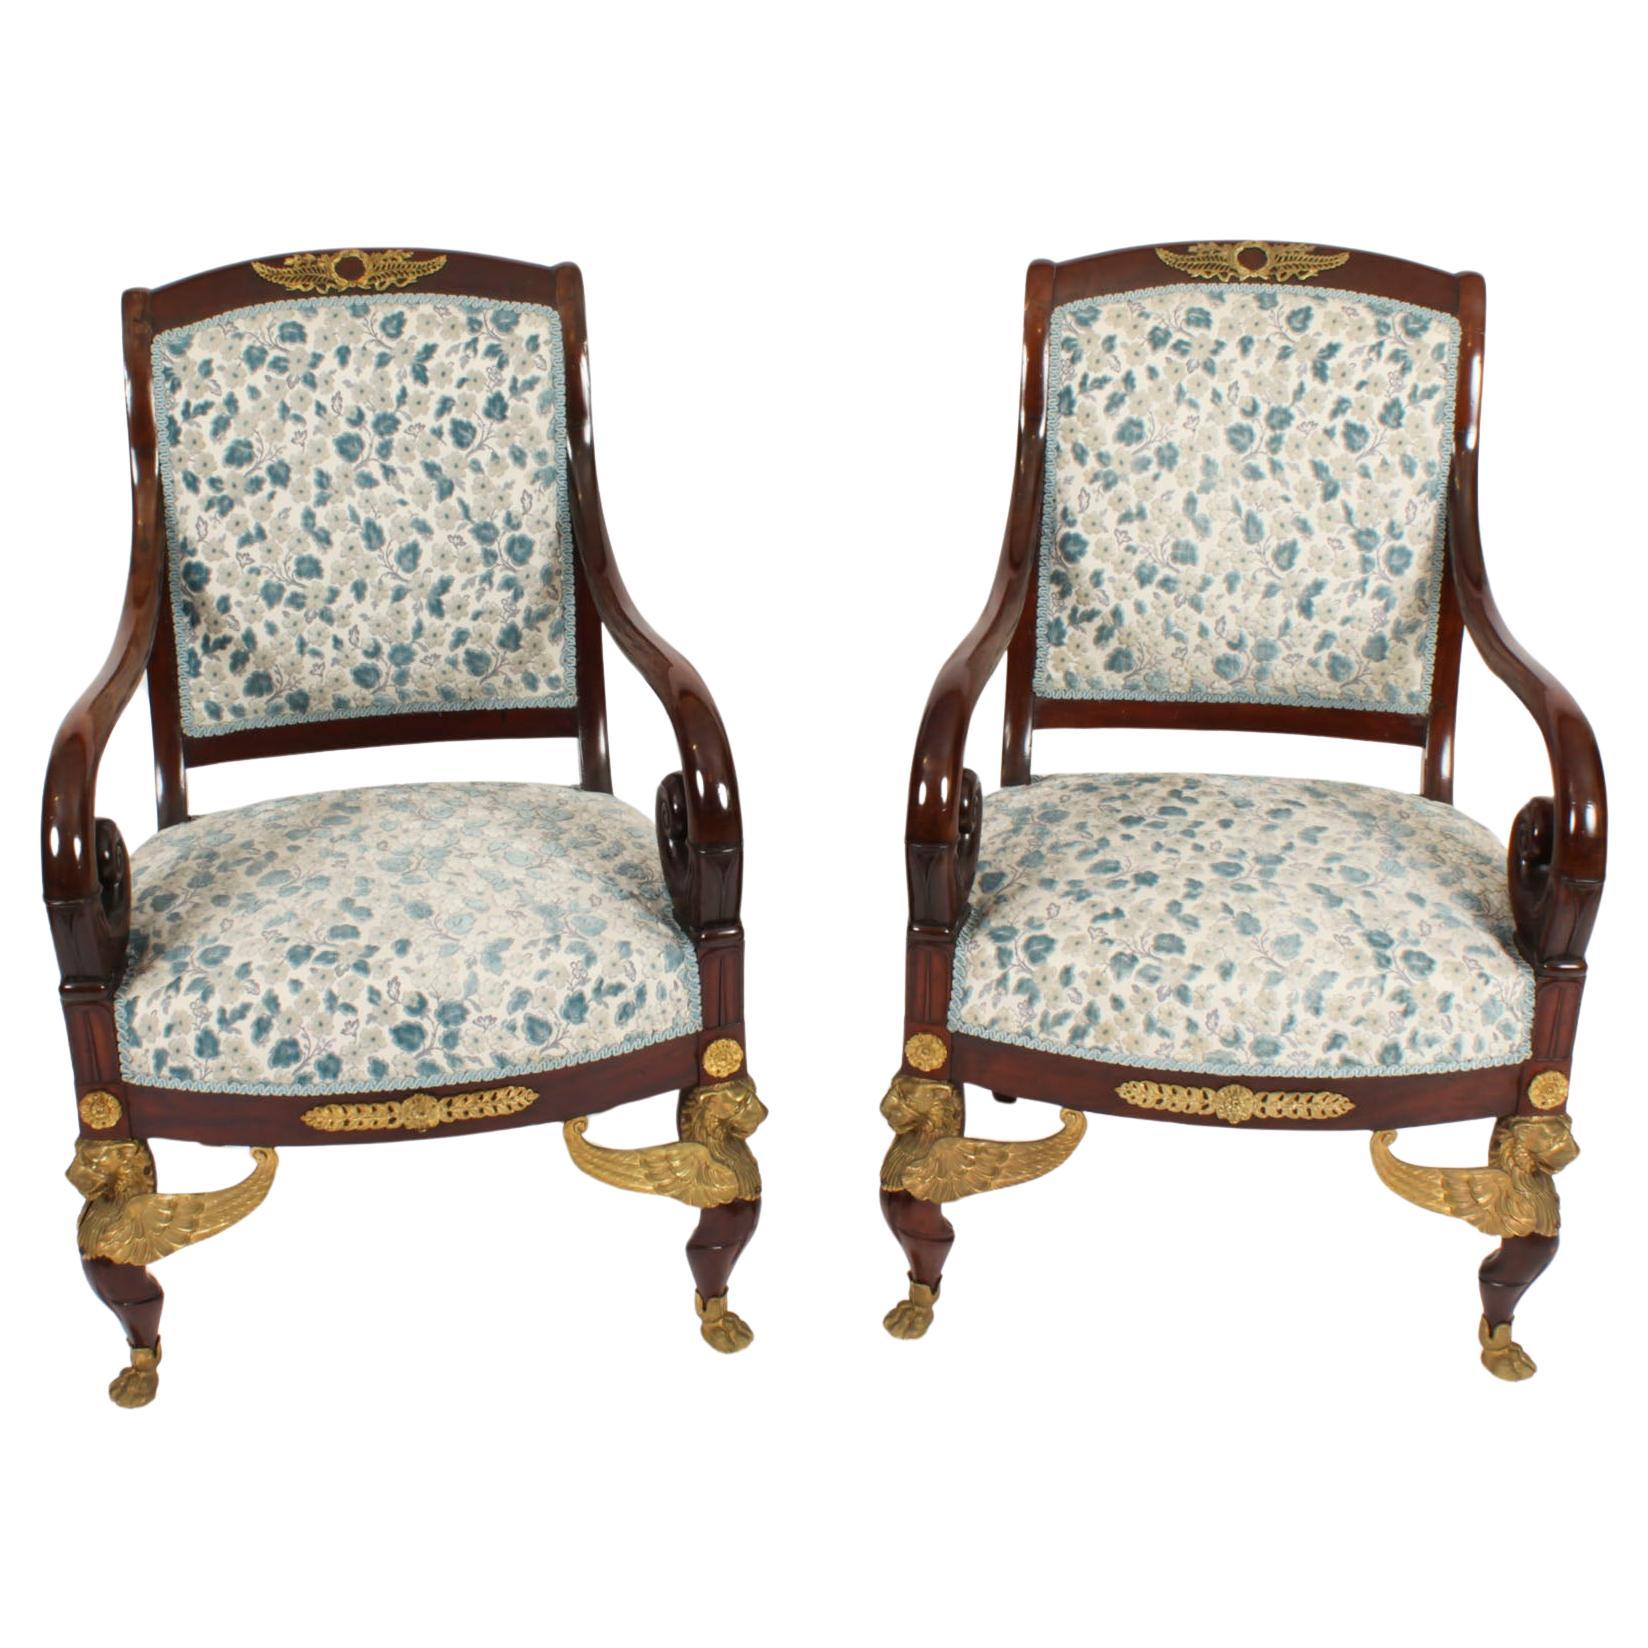 Antique Pair Ormolu Mounted Armchairs Empire Revival 1870s For Sale